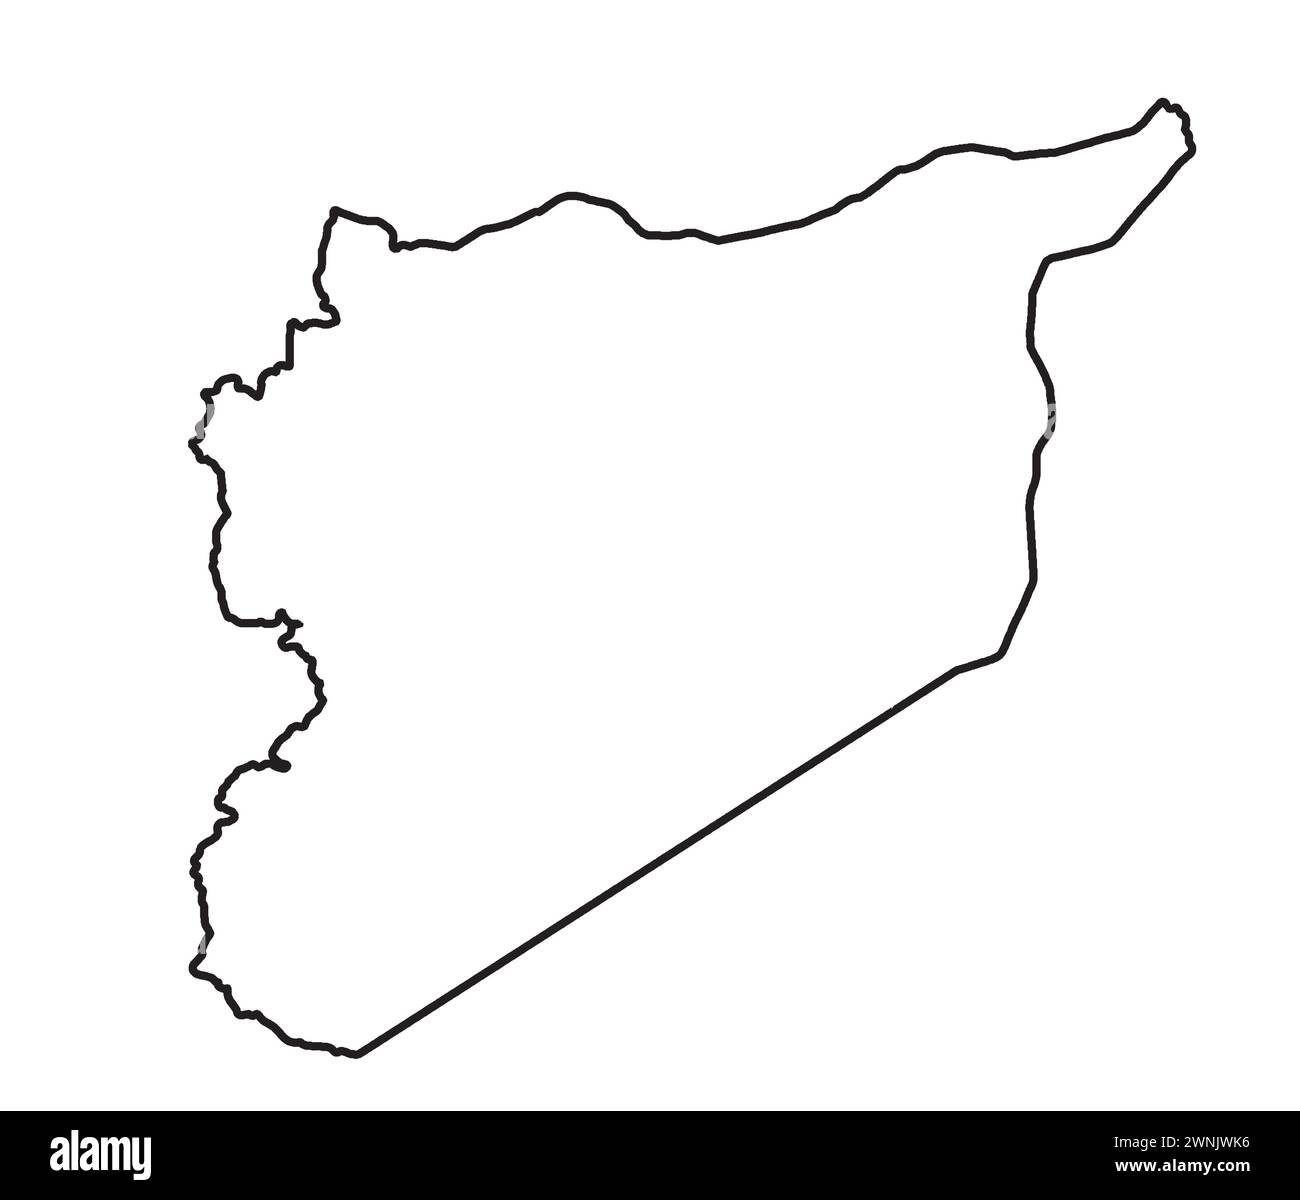 Outline silhouette map of Syria over a white background Stock Vector